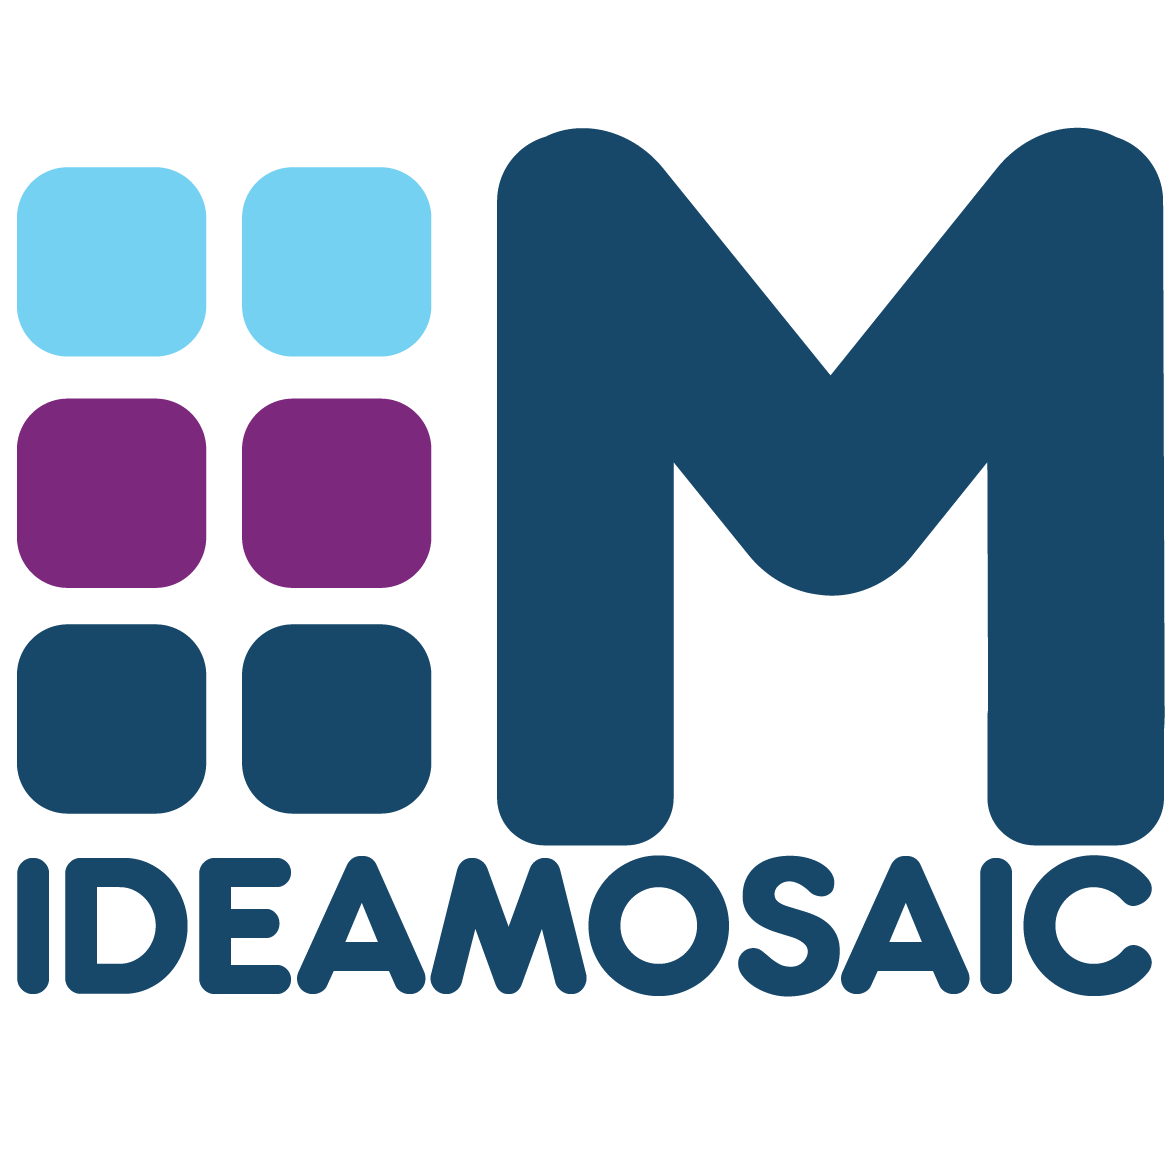 The logo for "Idea Mosaic" reads the company name beneath the logo. The logo has coloured squares in the shape of the "I" and a capital blue "M"